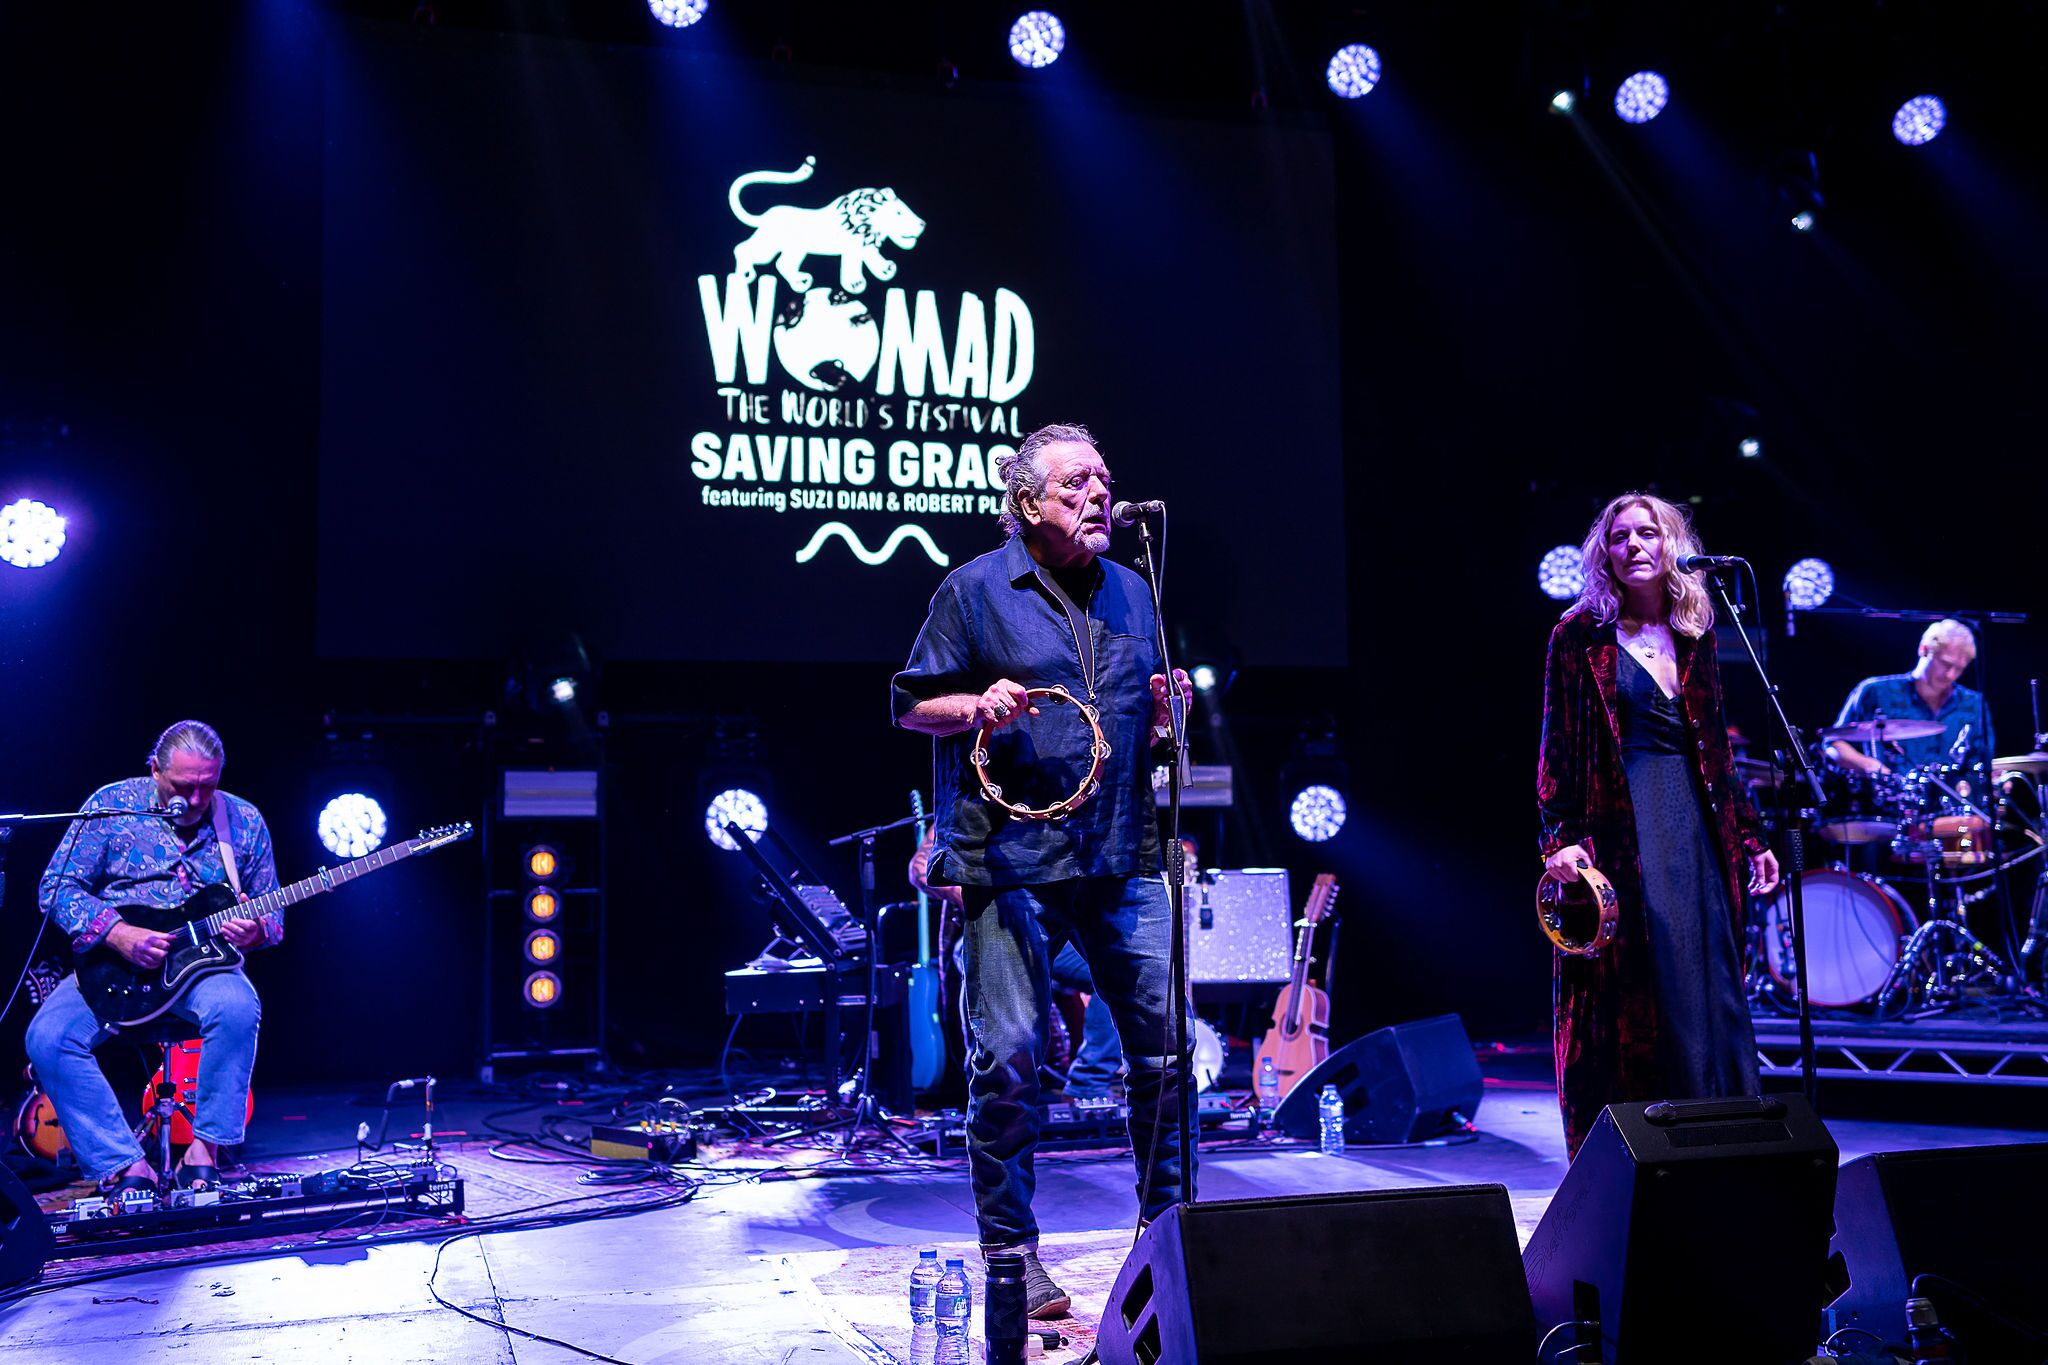 Robert Plant's Saving Grace at WOMAD